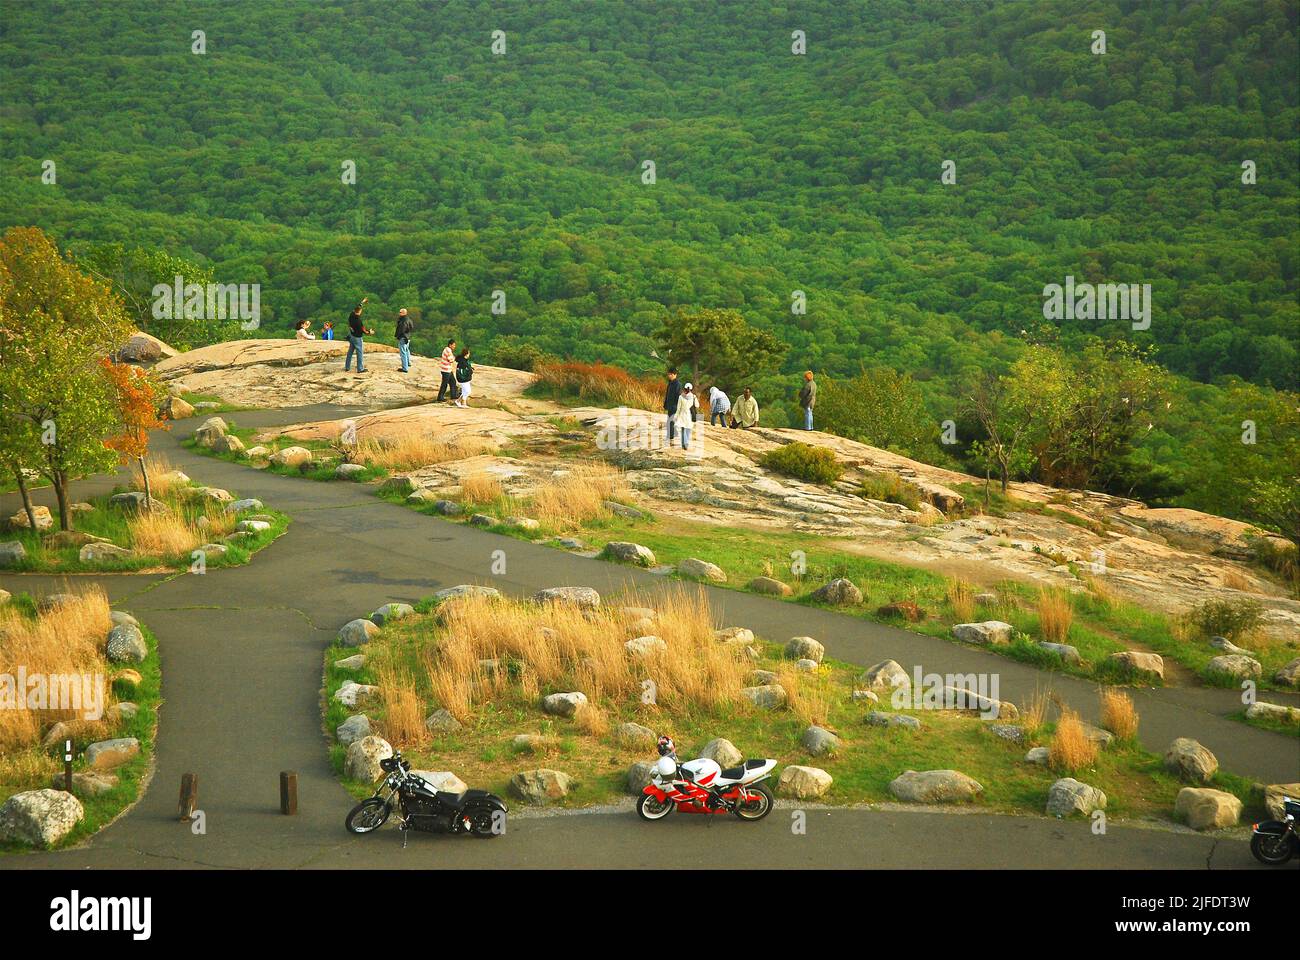 A group of people walk from their motorcycles to get a view near the cliff in New York's Bear Mountain and enjoy the views of the woodlands and forest Stock Photo